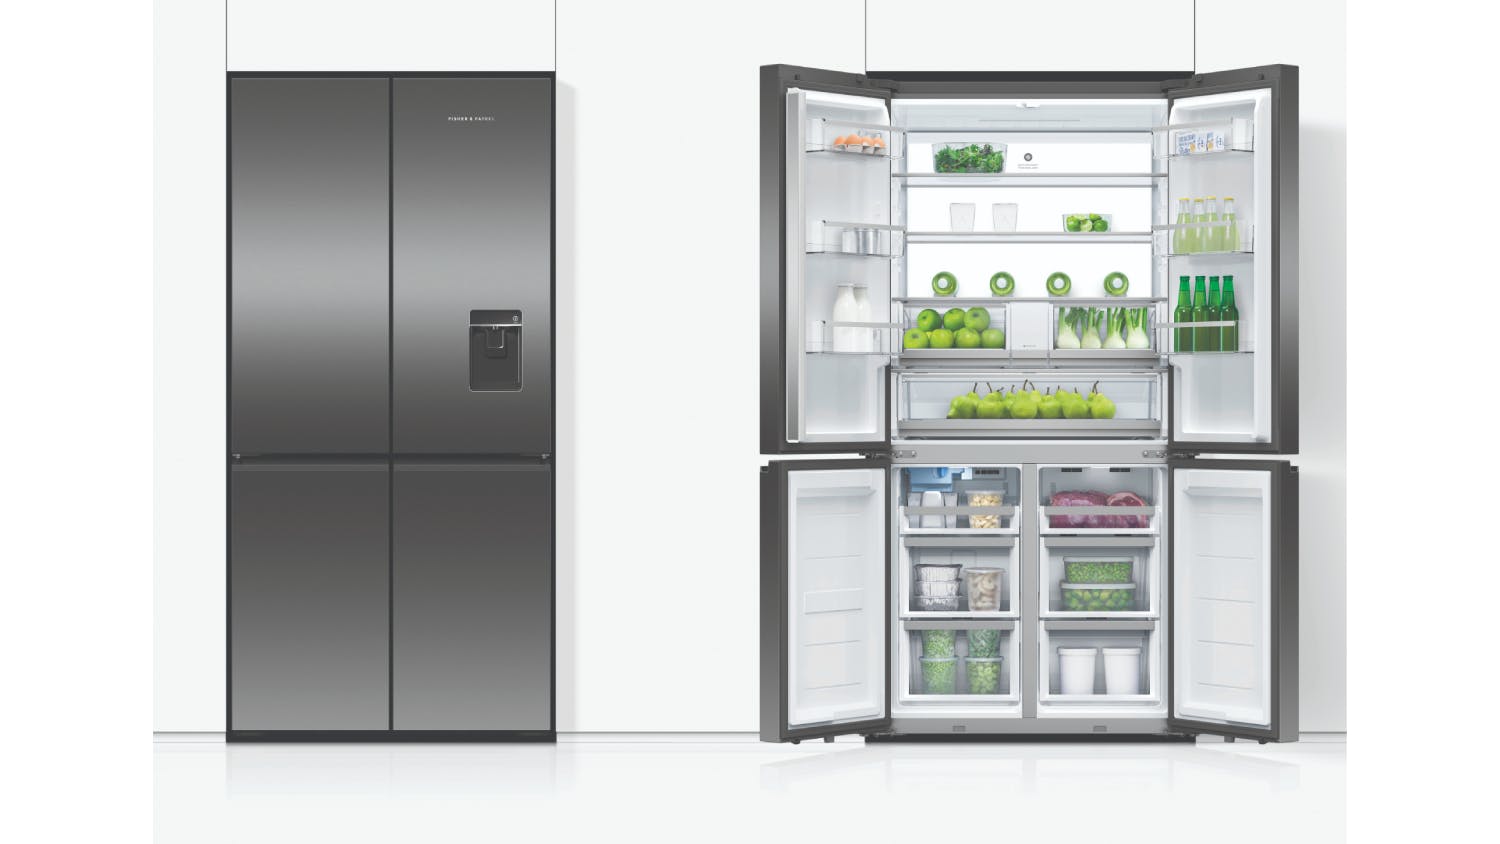 Fisher & Paykel 690L Quad Door Fridge Freezer with Ice & Water Dispenser - Black Stainless Steel (Series 7/RF730QNUVB1)